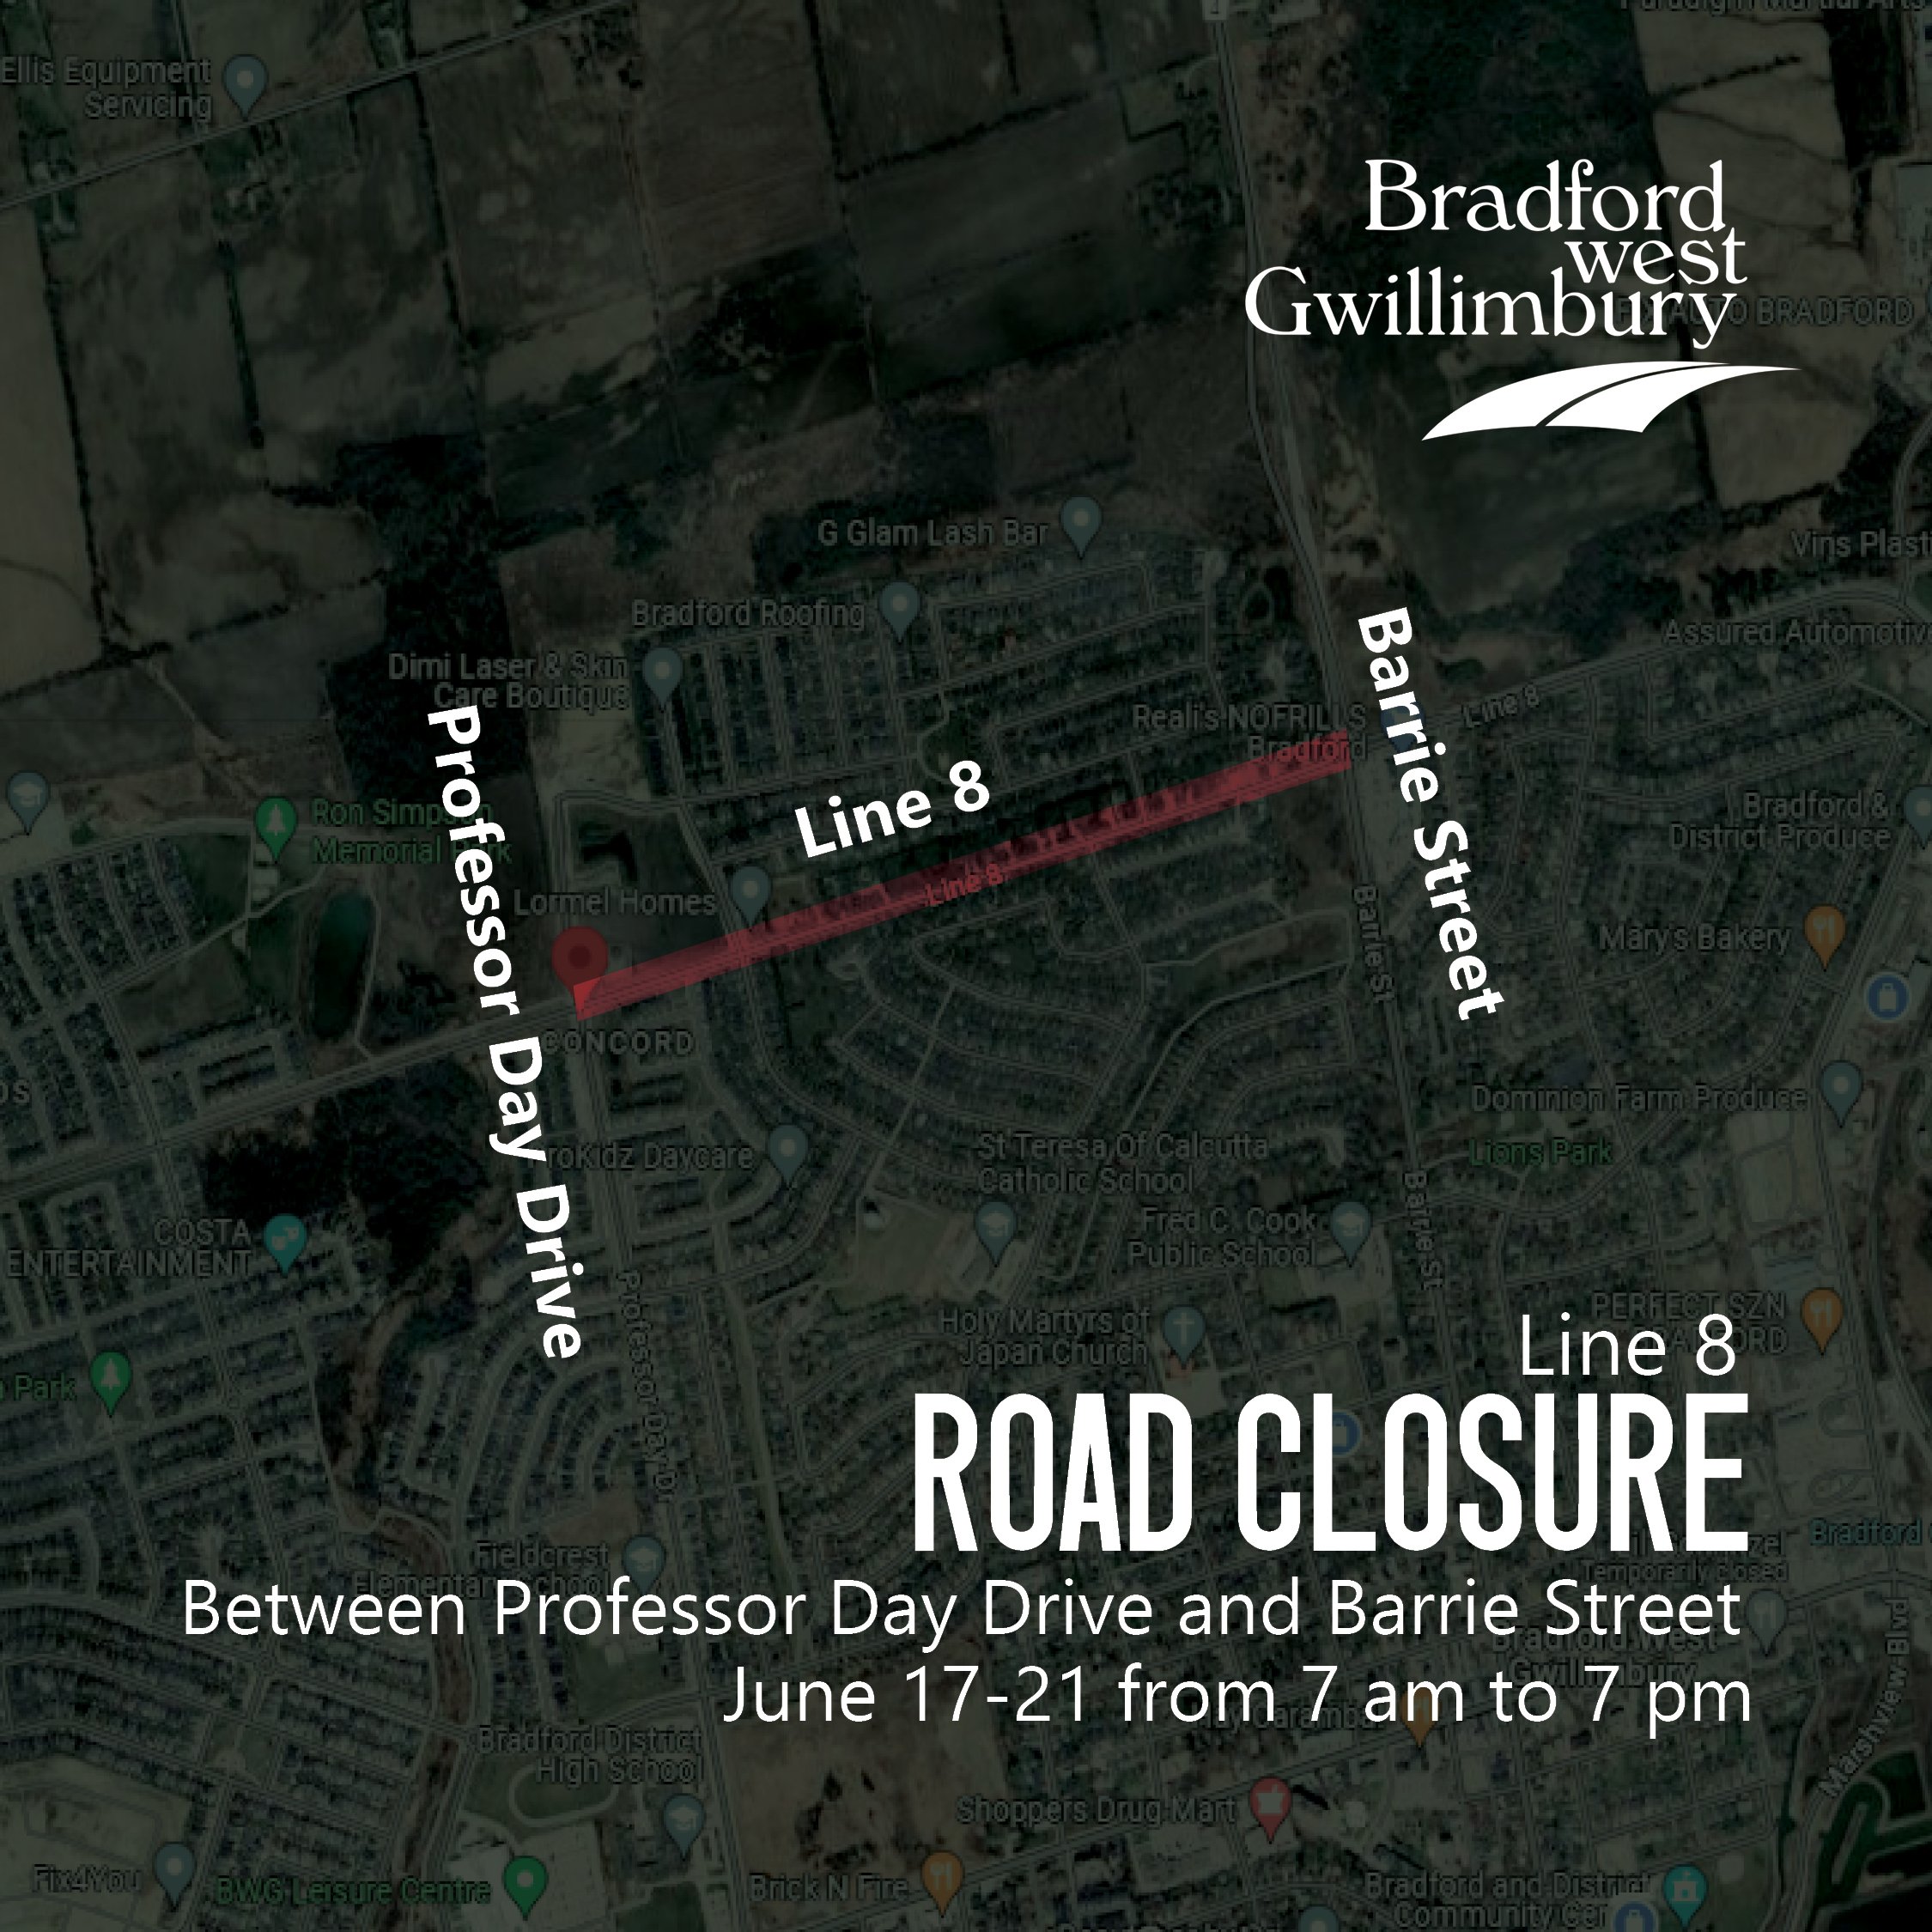 Graphic showing closure on Line 8 between Professor Day Drive and Barrie Street